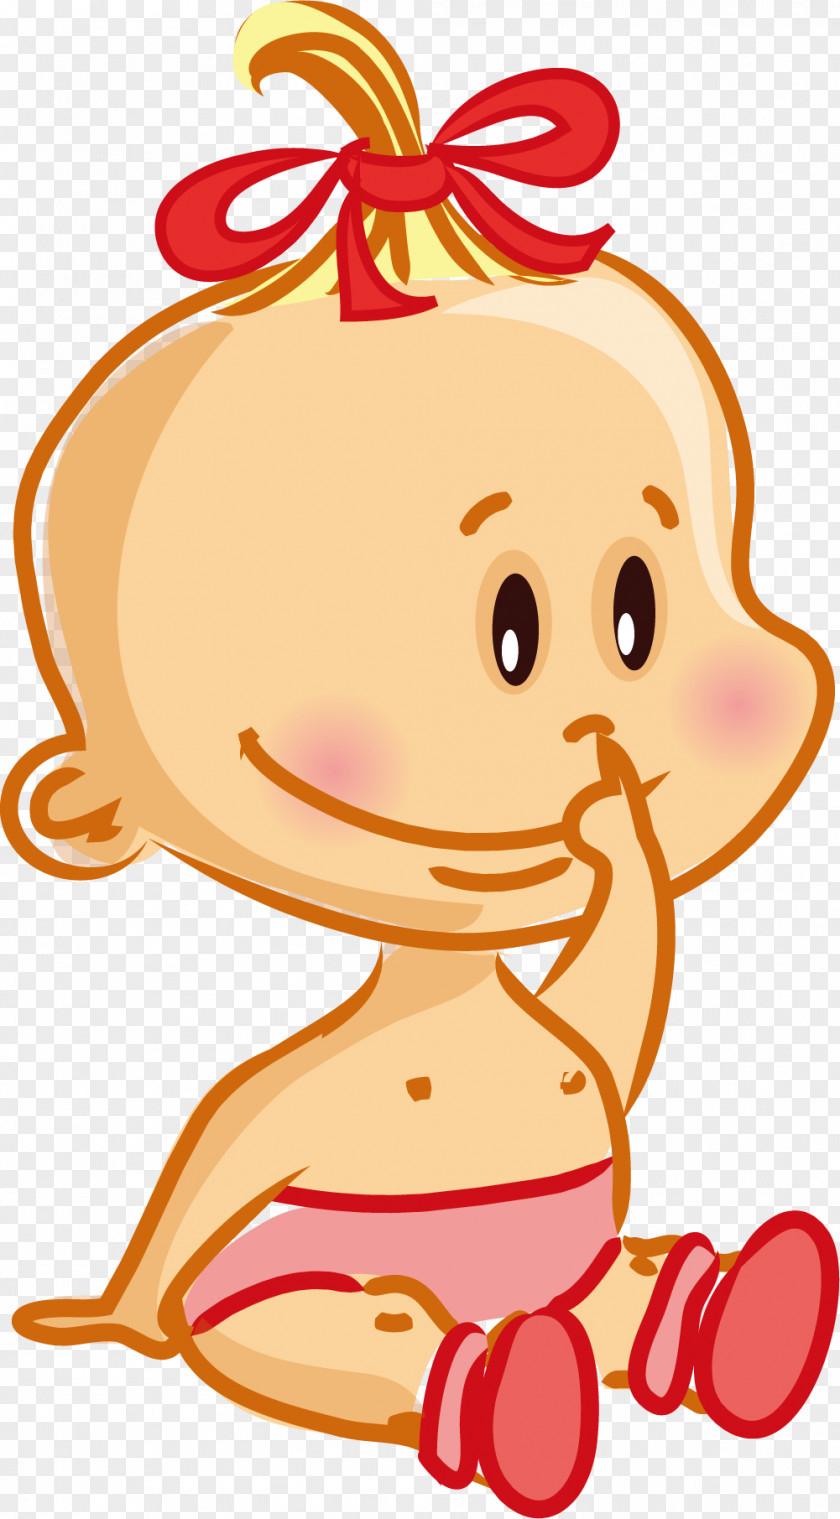 Hand Painted Baby Infant Pregnancy Boy Illustration PNG